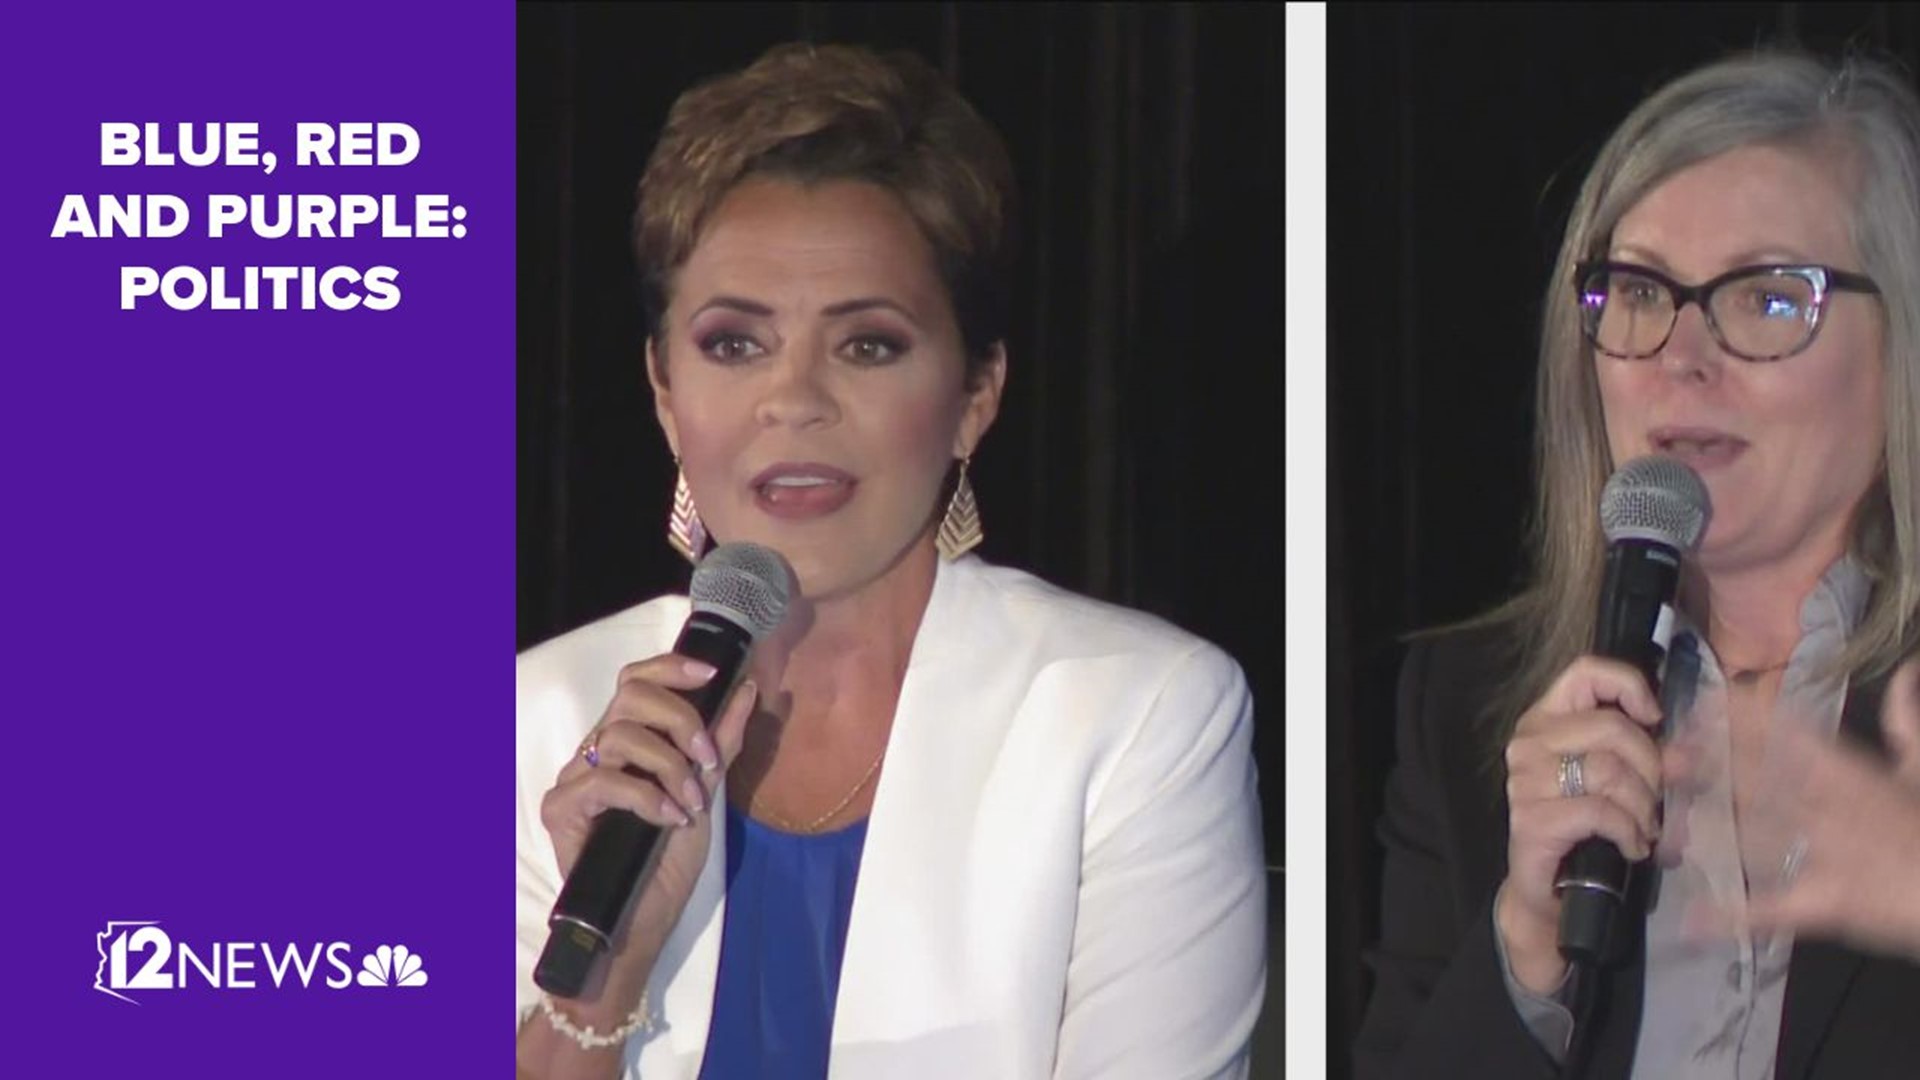 The two candidates for the Arizona Gubernatorial election spoke at a forum on Thursday. They outlined their individual approaches if they were elected.